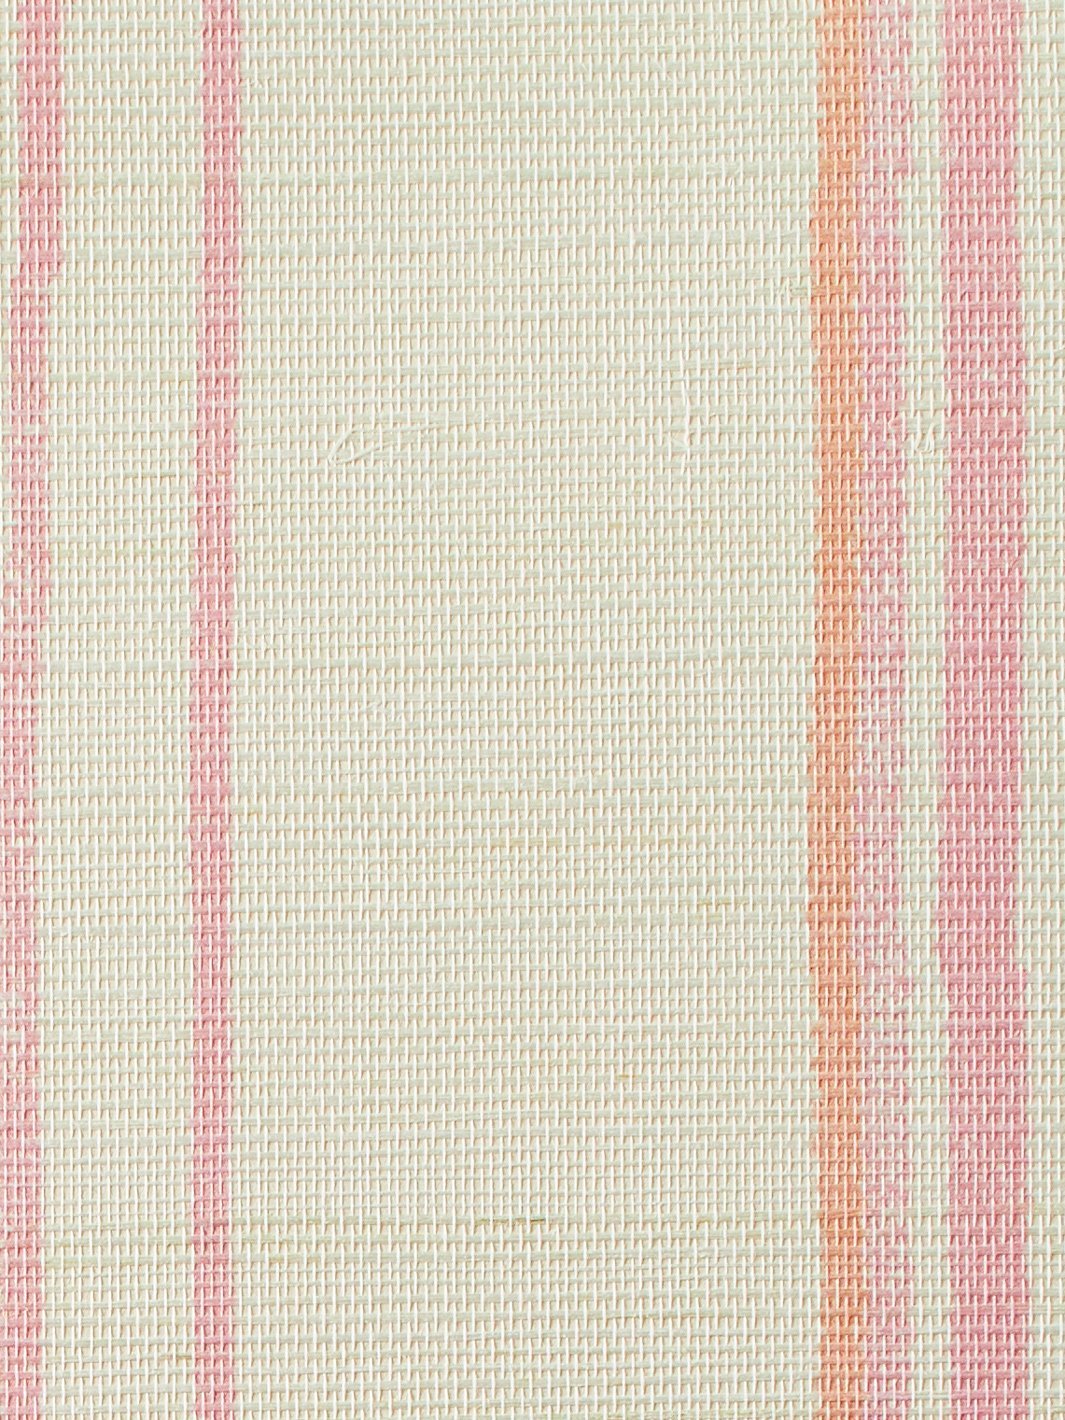 'Two Tone Stripe' Grasscloth' Wallpaper by Nathan Turner - Creamsicle